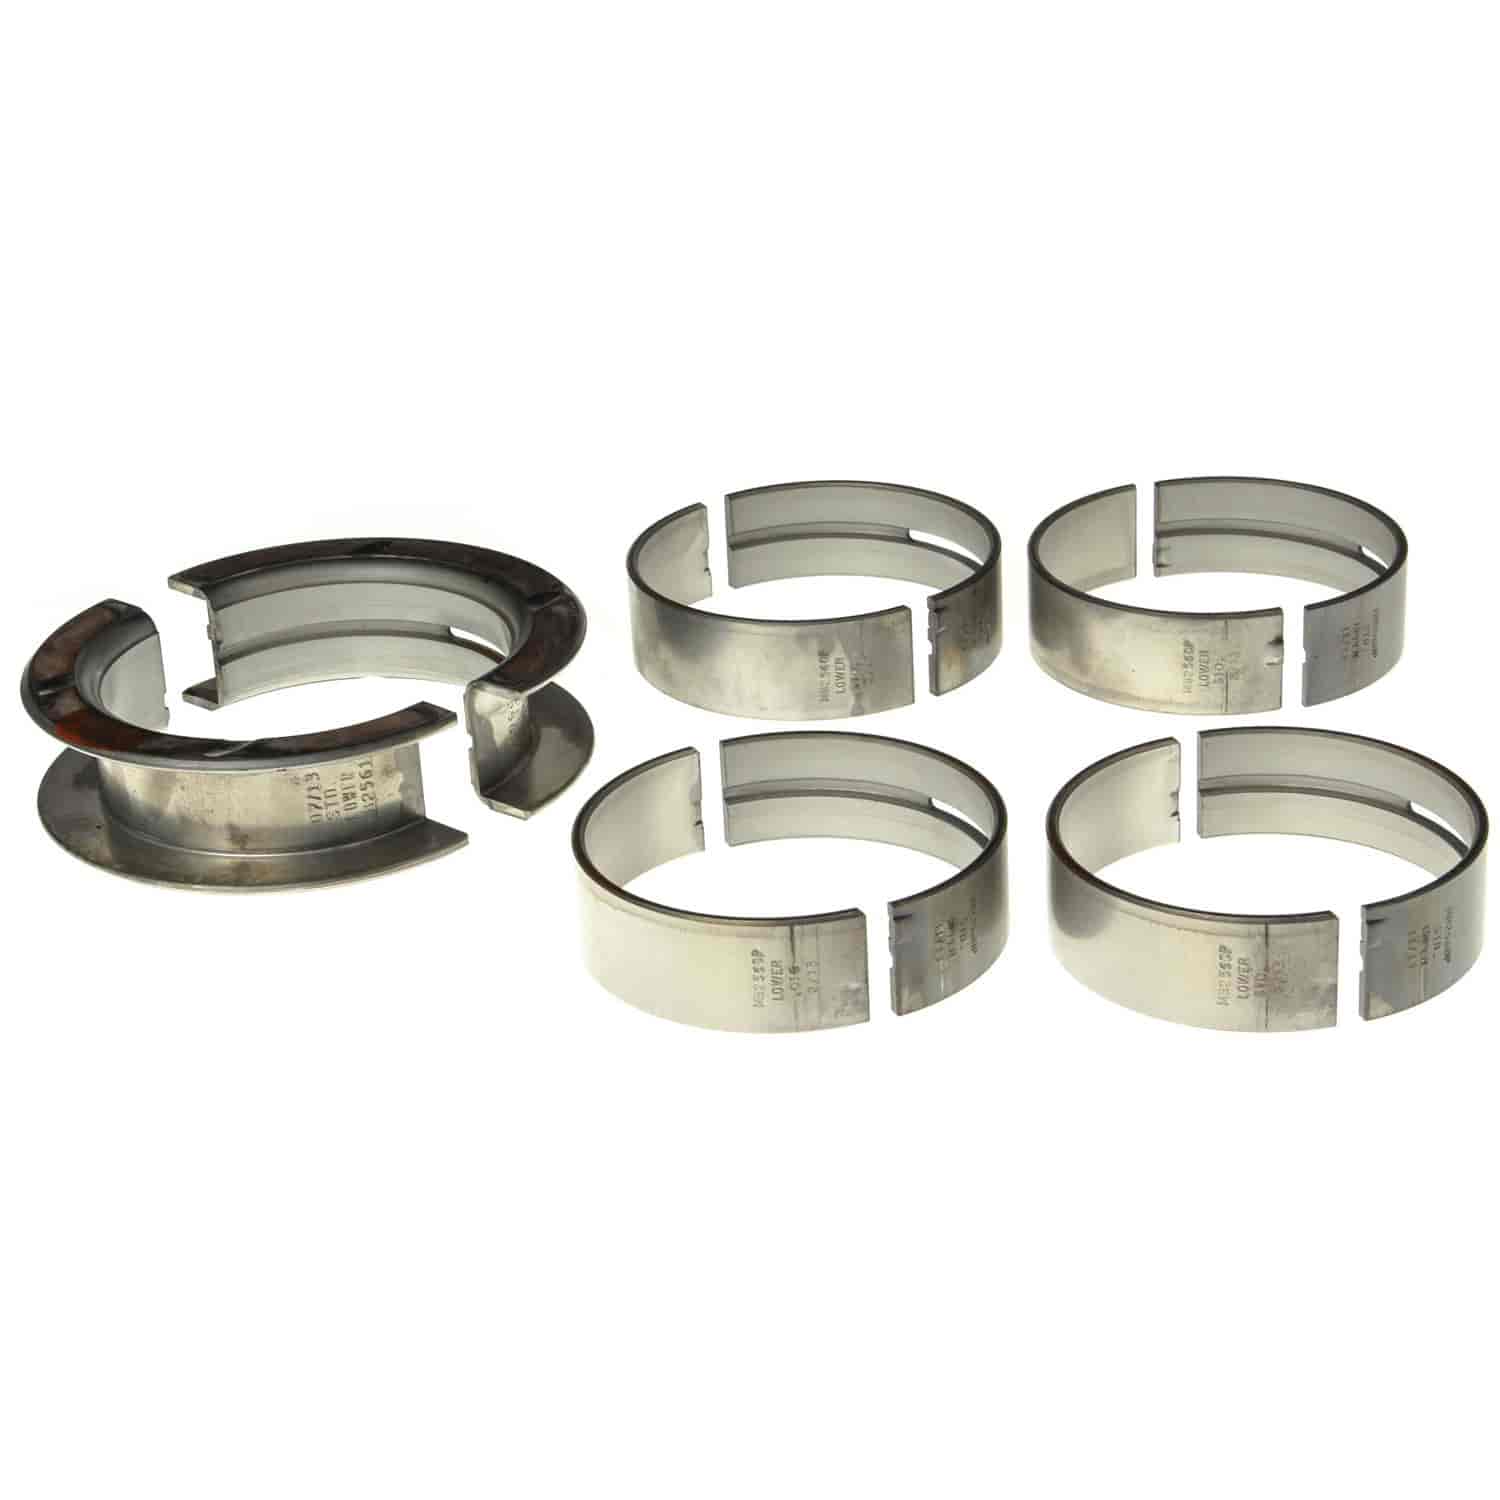 Main Bearing Set Ford 1969-1974 V8 351C (5.8L) with Standard Size